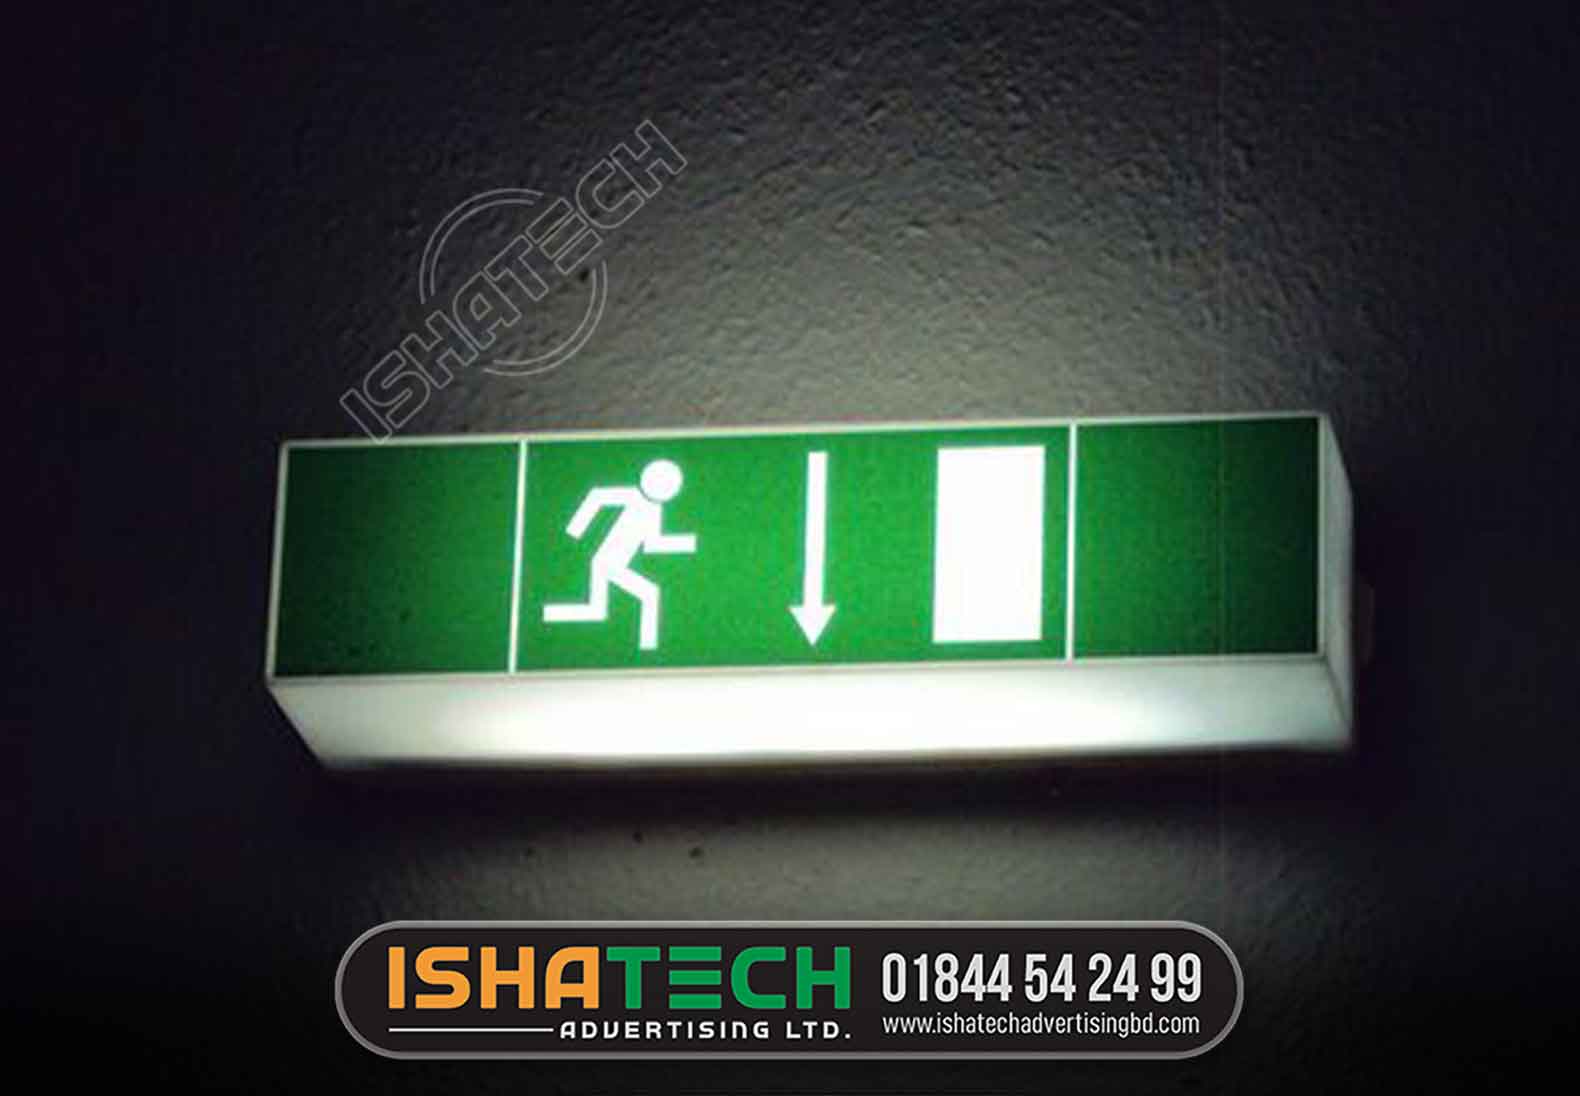 Exit lights are also known as exit lights, exit instructions, exit signs, exit signs are instructions, leading to the exit door, emergency exit, helping in an emergency, people can quickly orient to the direction of the exit, the fastest way to escape.